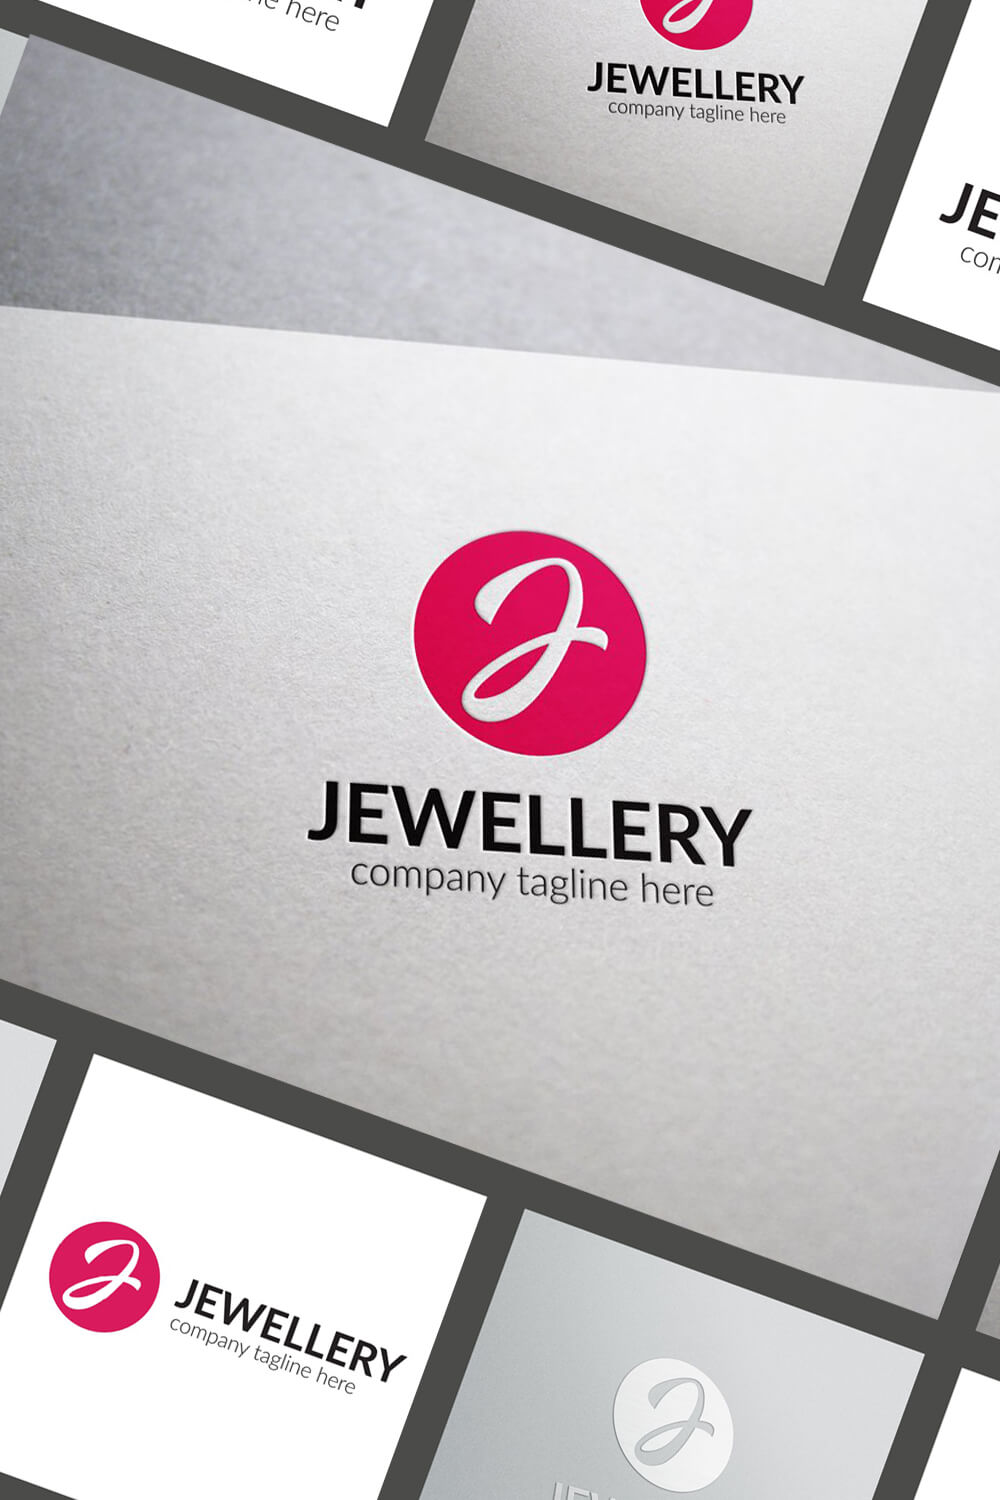 Red J jewelry logo on a gray diagonal background.